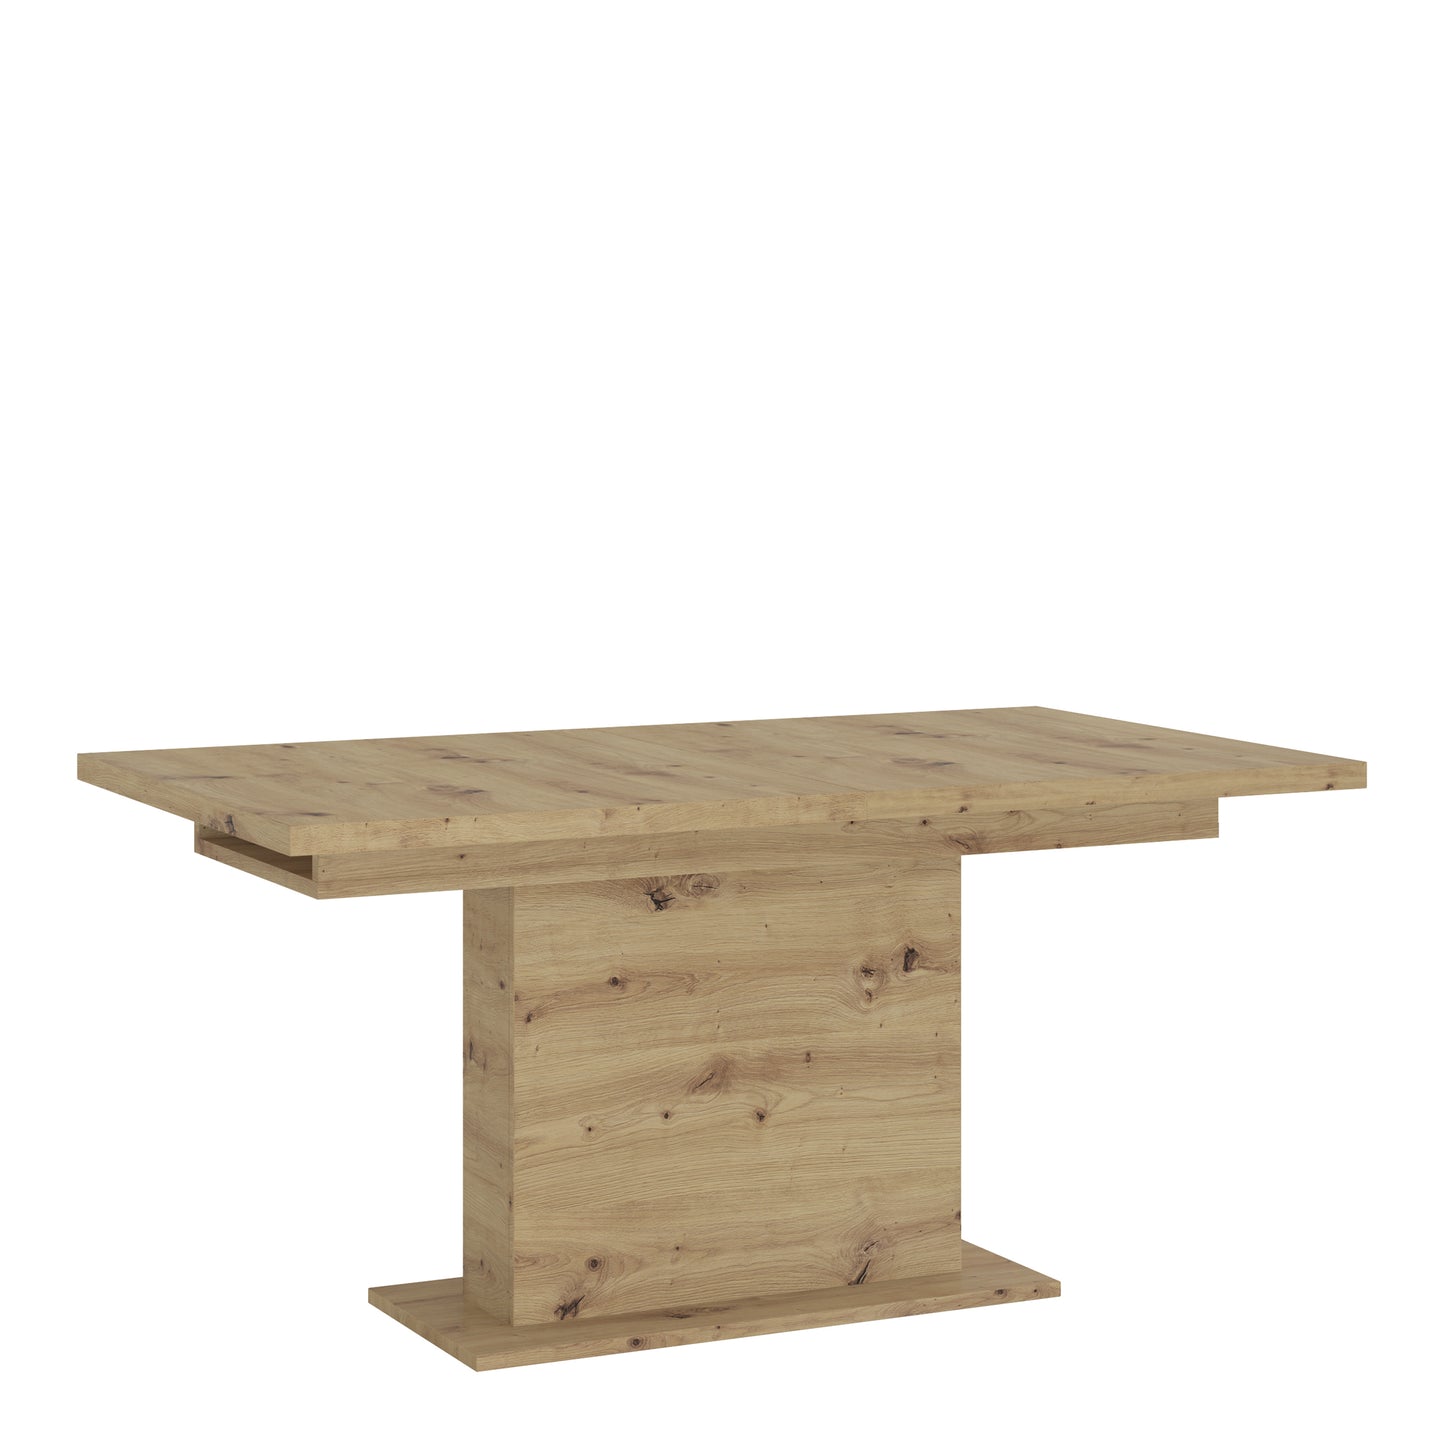 Luci Bright Luci extending dining table 160-200cm in White and Oak